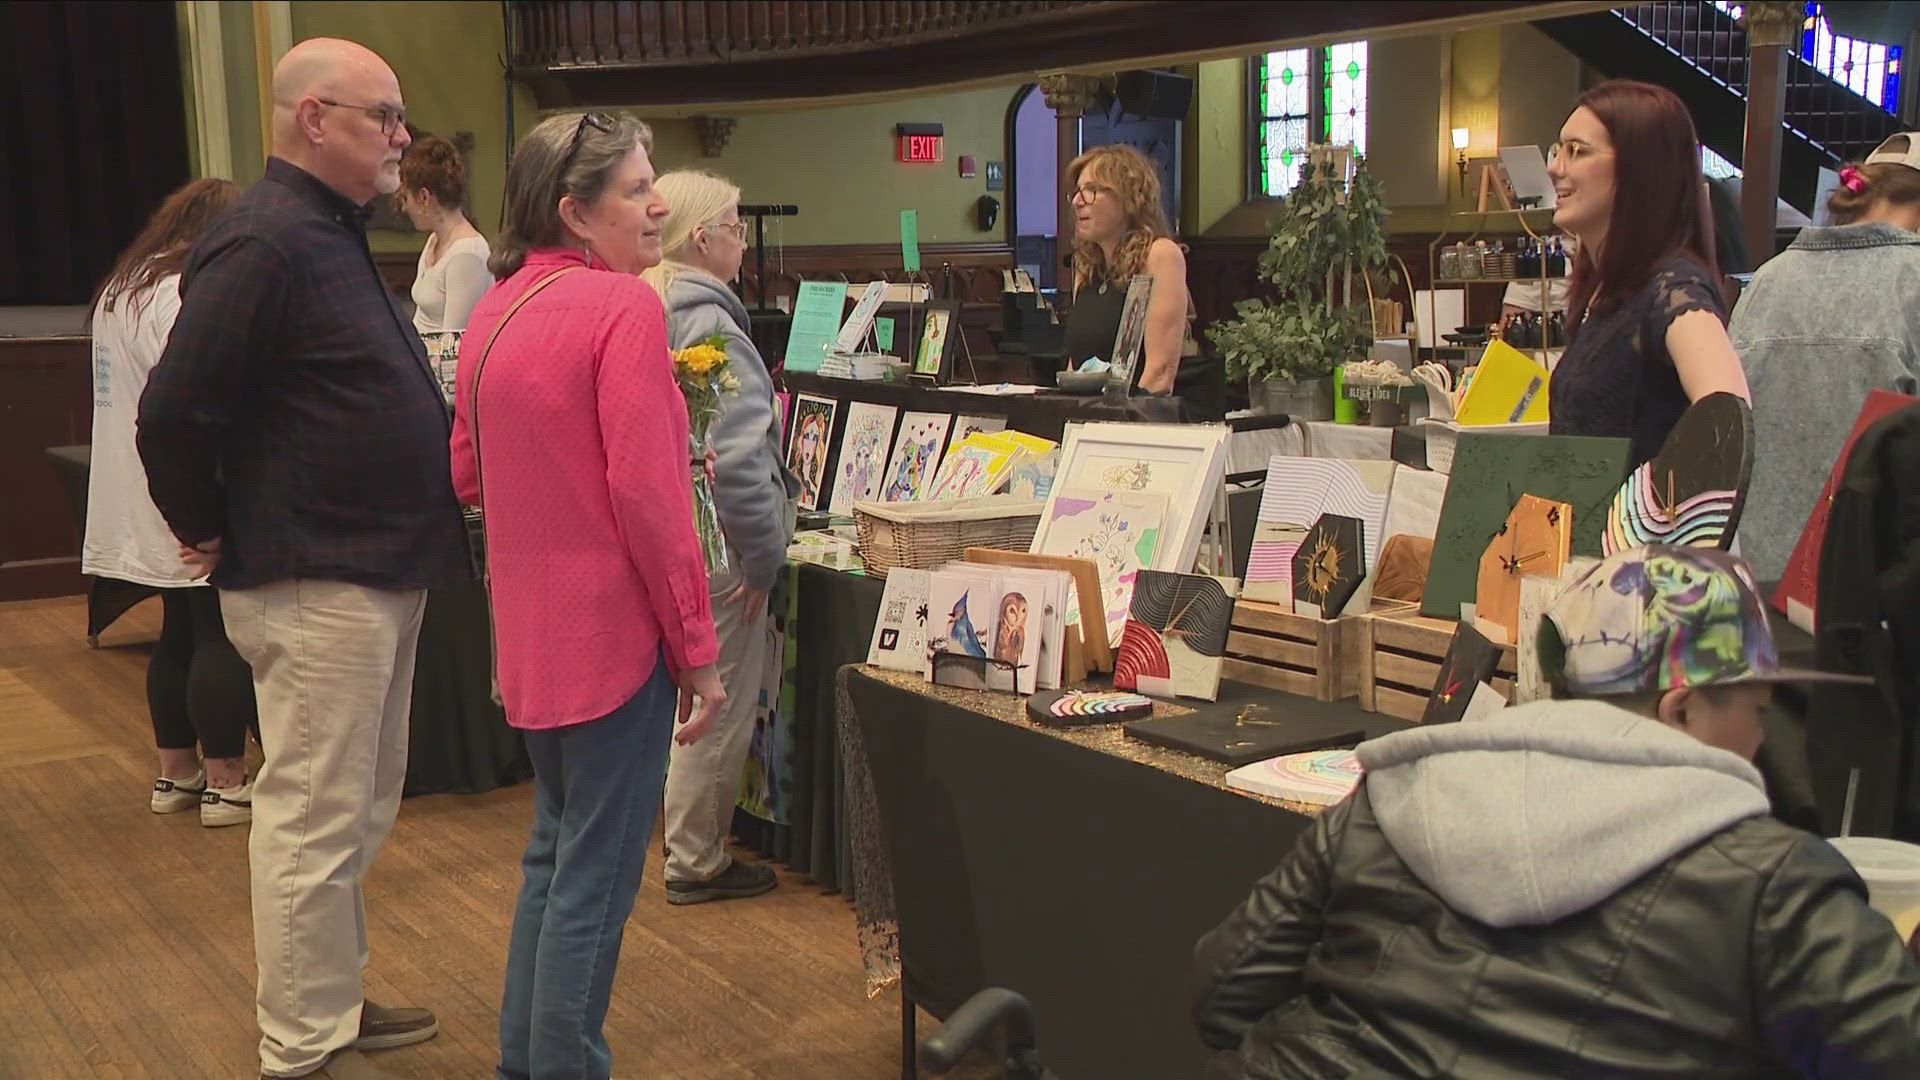 Erie County Crisis Services hosted the first ever Embody Consent Expo at Babeville, Sunday.